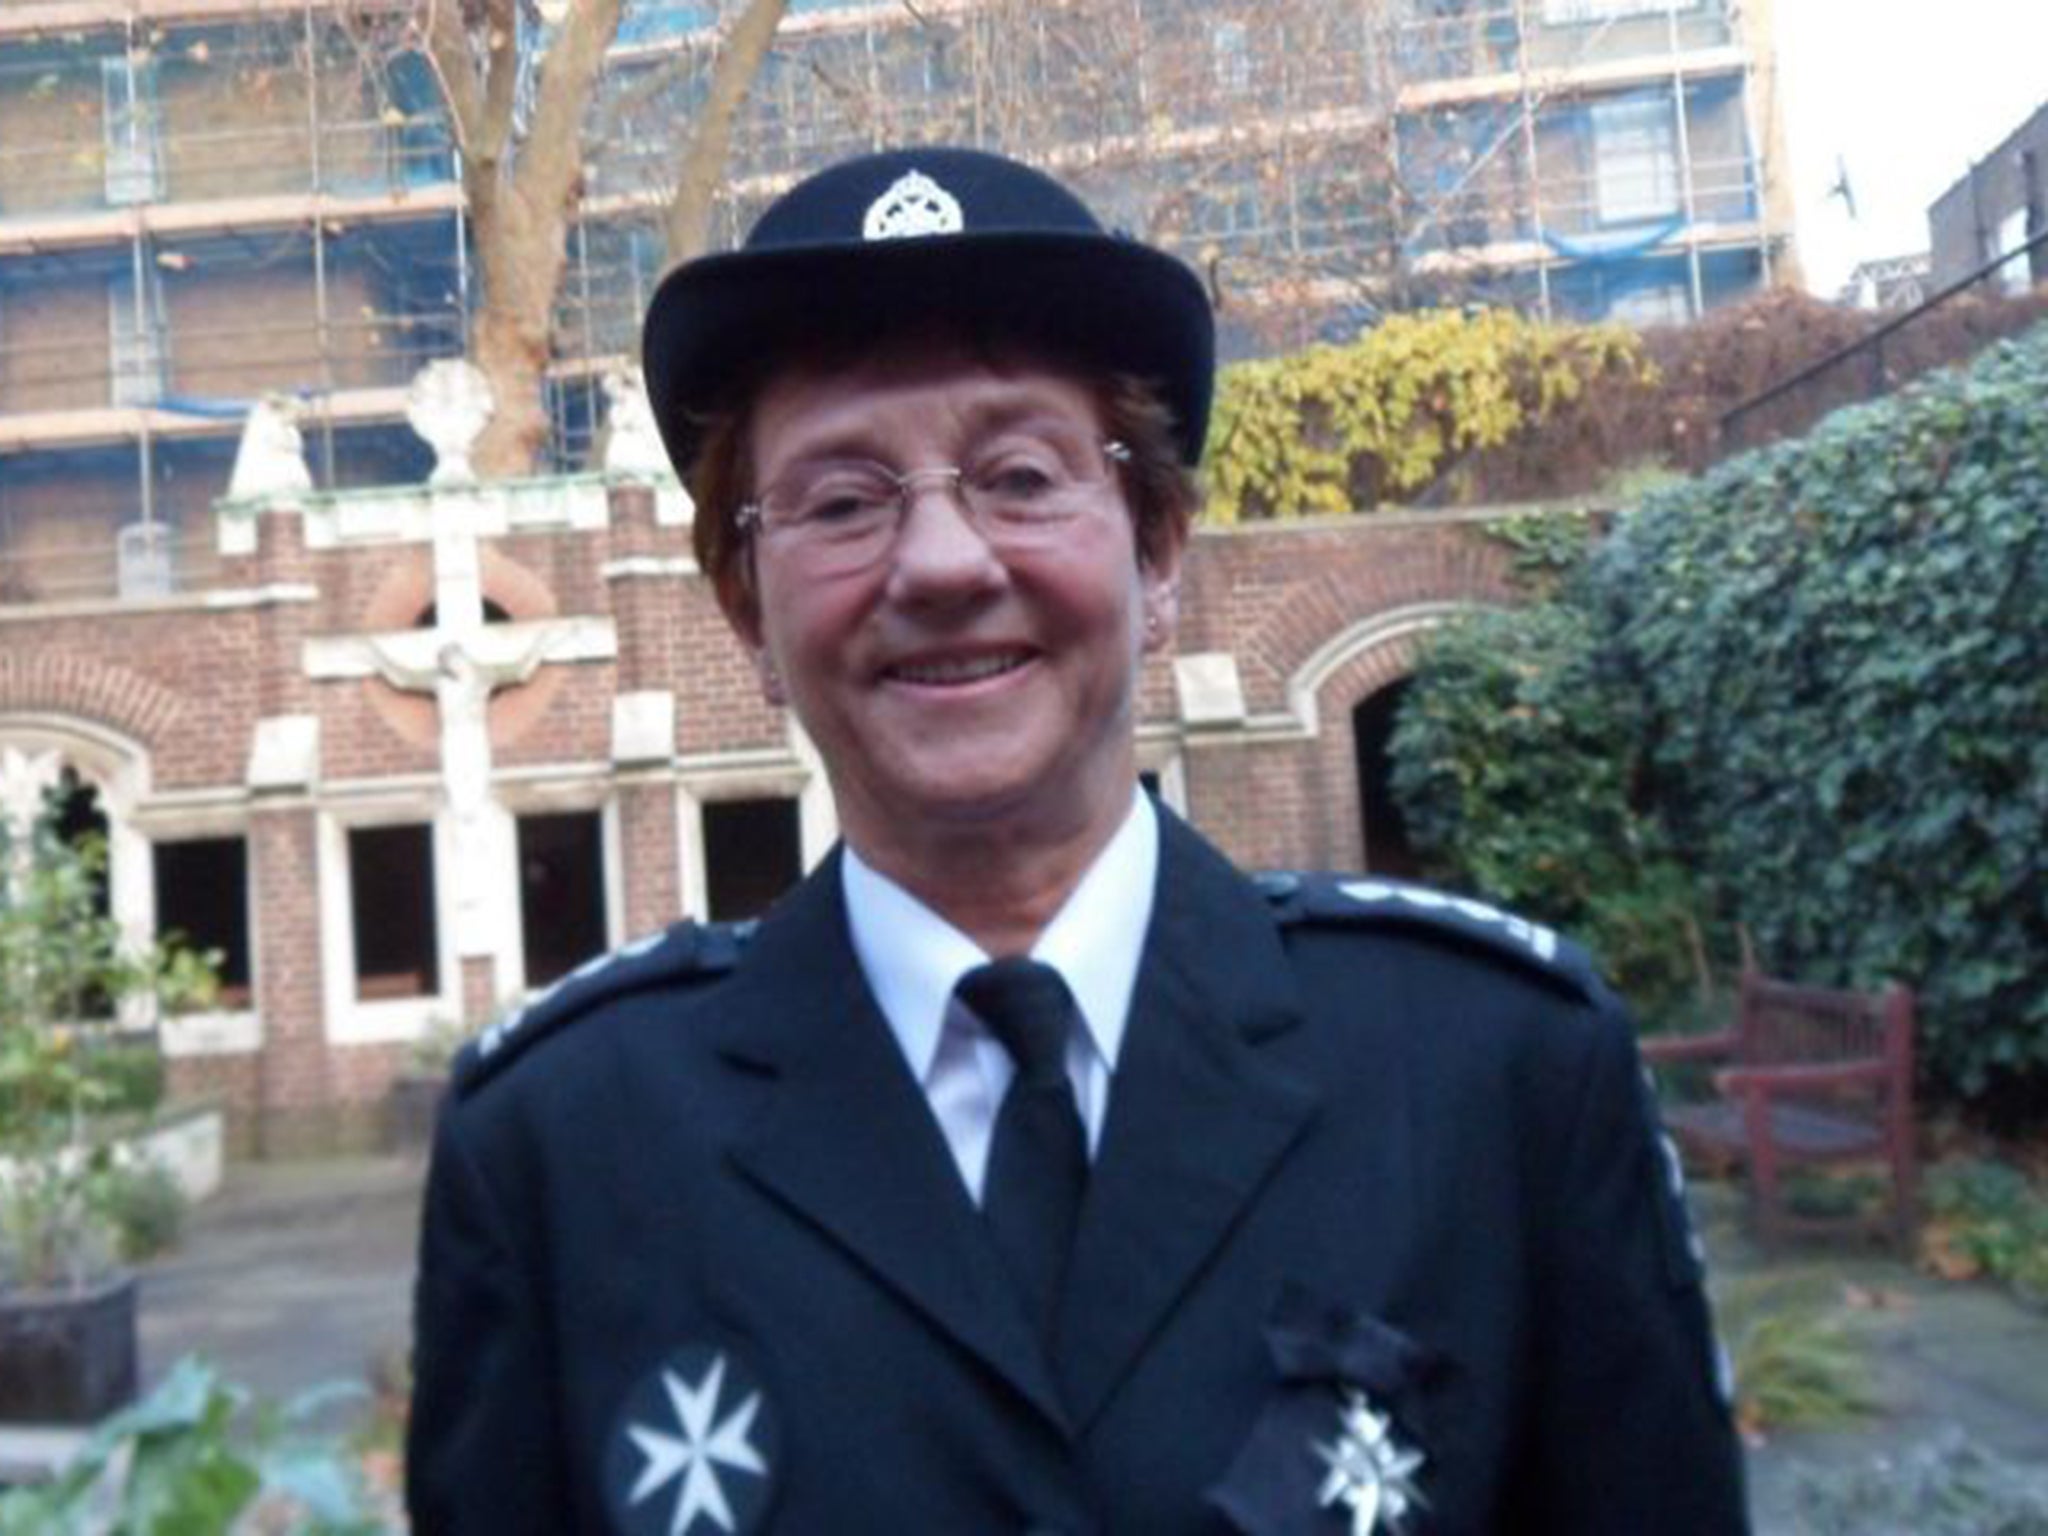 Rita Marley is one of the St John Ambulance’s most remarkable characters, clocking up 38 years of volunteer service